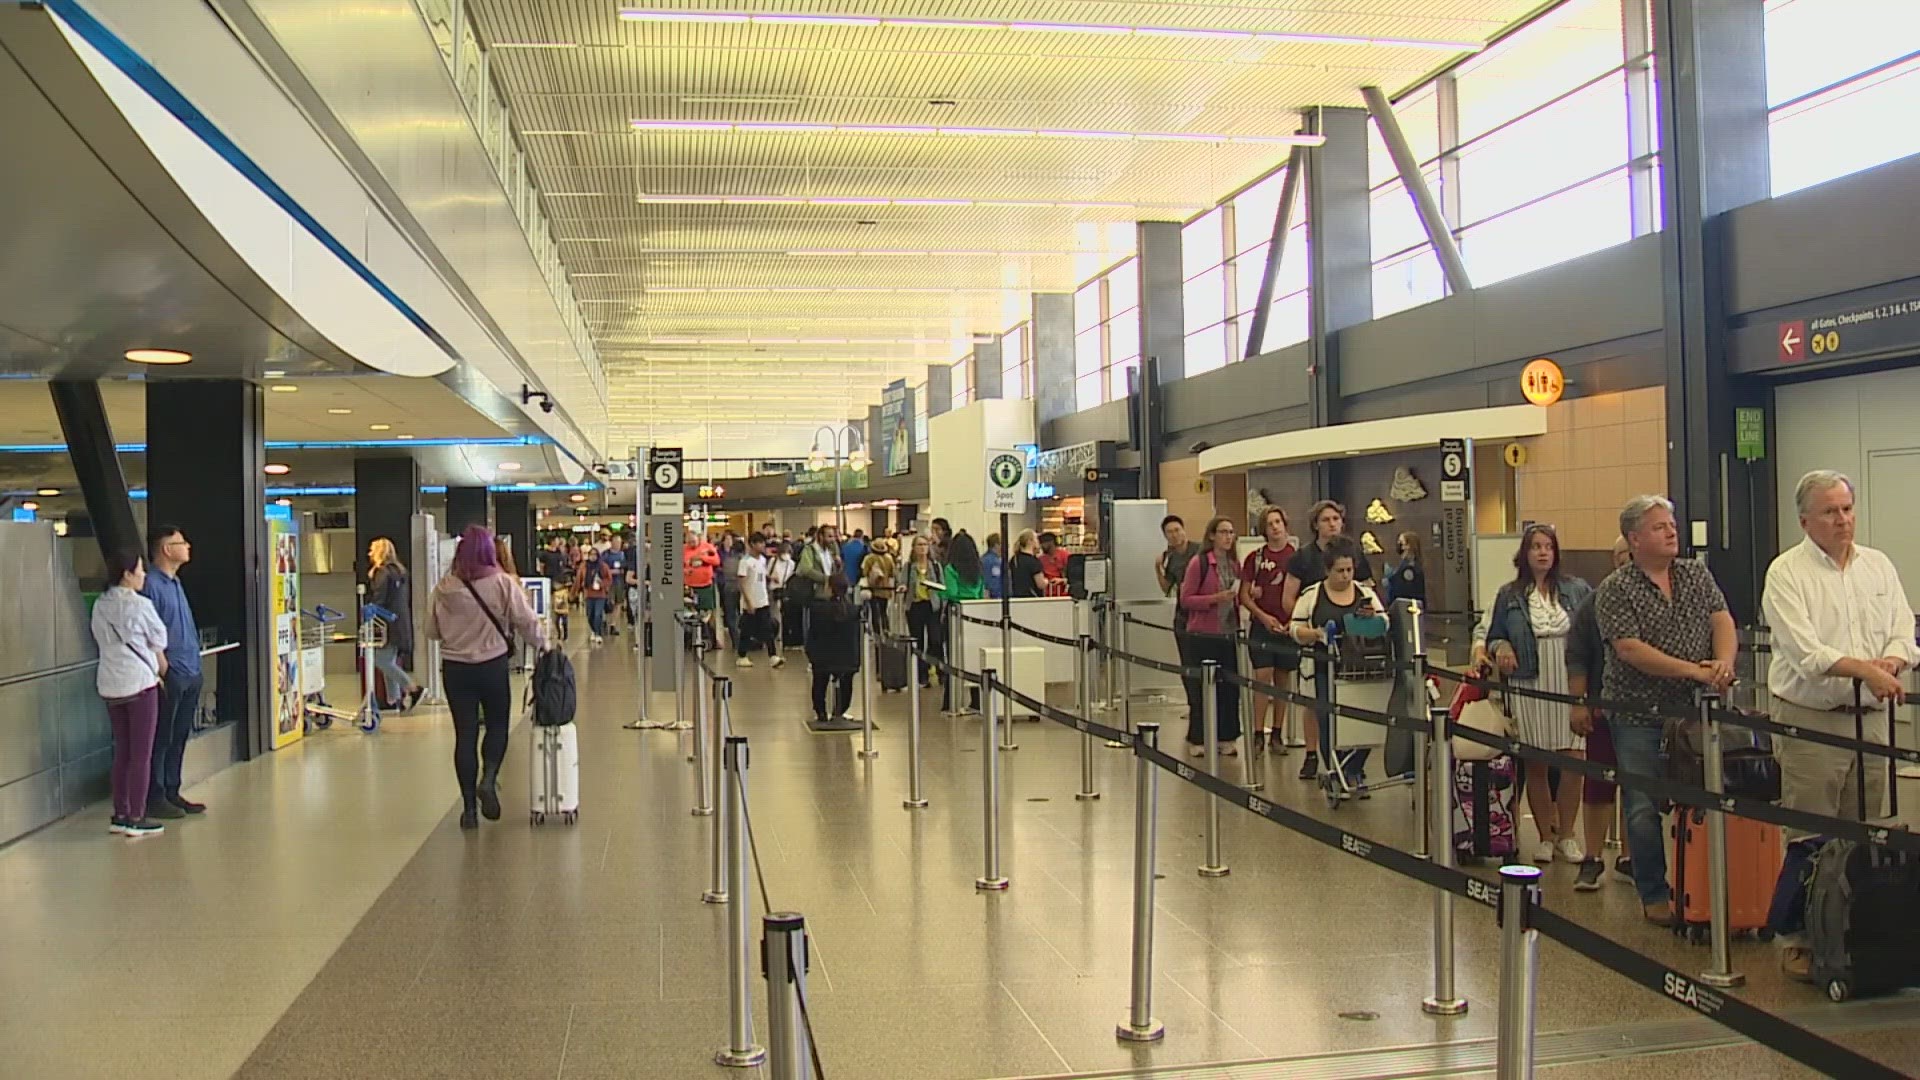 The Port of Seattle estimates 198,000 travelers passed through Seattle-Tacoma International Airport this week.